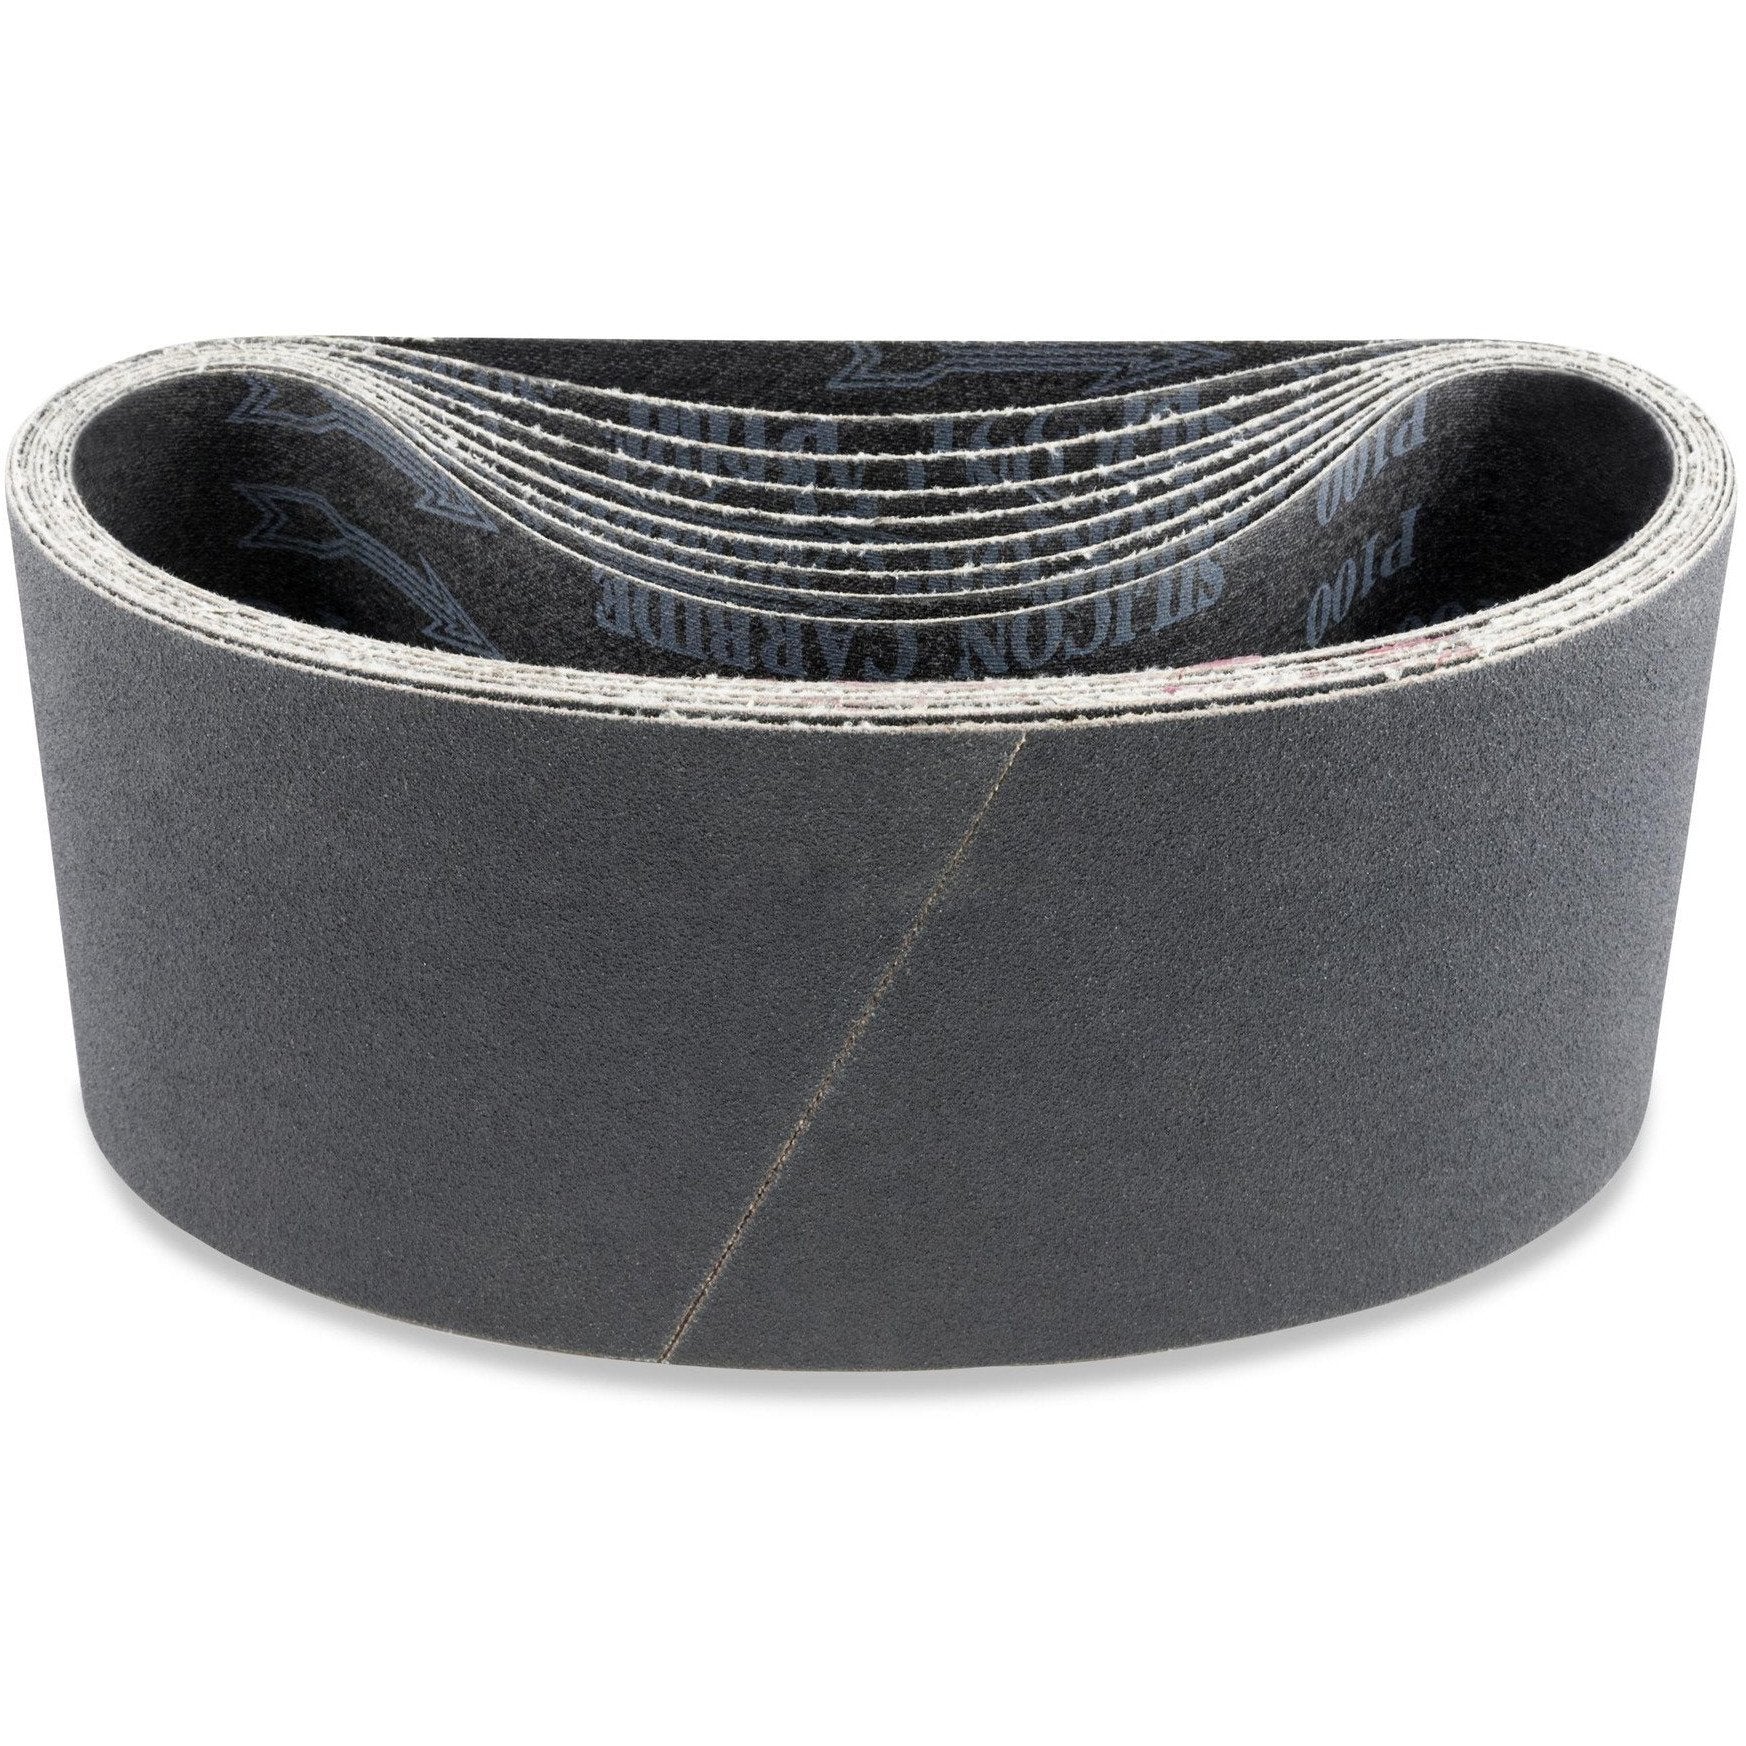 3 X 24 Inch Industrial Grade Silicon Carbide Sanding Belts, 8 Pack - Red Label Abrasives